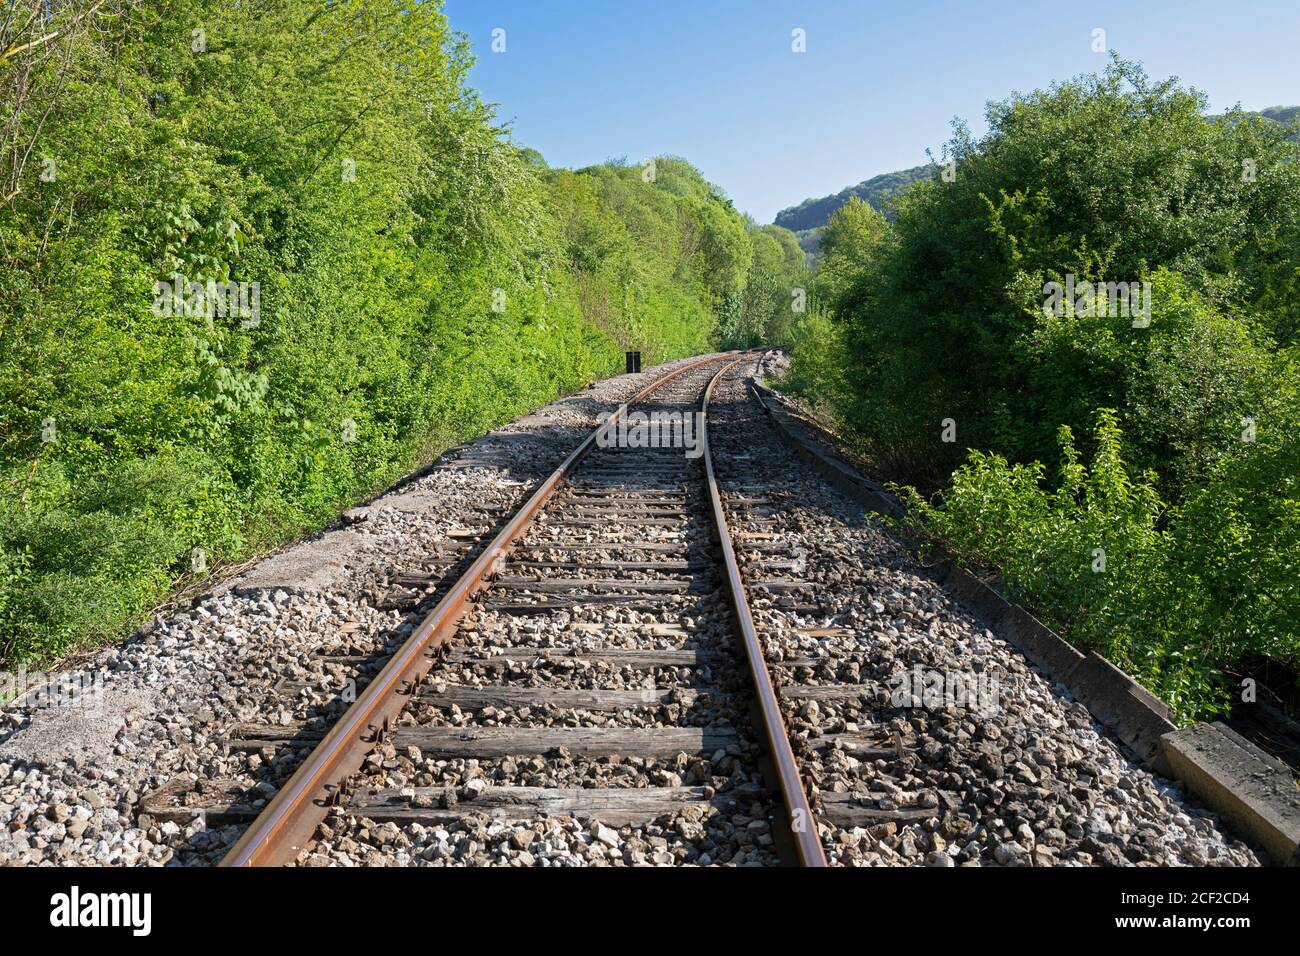 Europe, Luxembourg, Colmar-Berg, ligne ferroviaire courbe. Banque D'Images